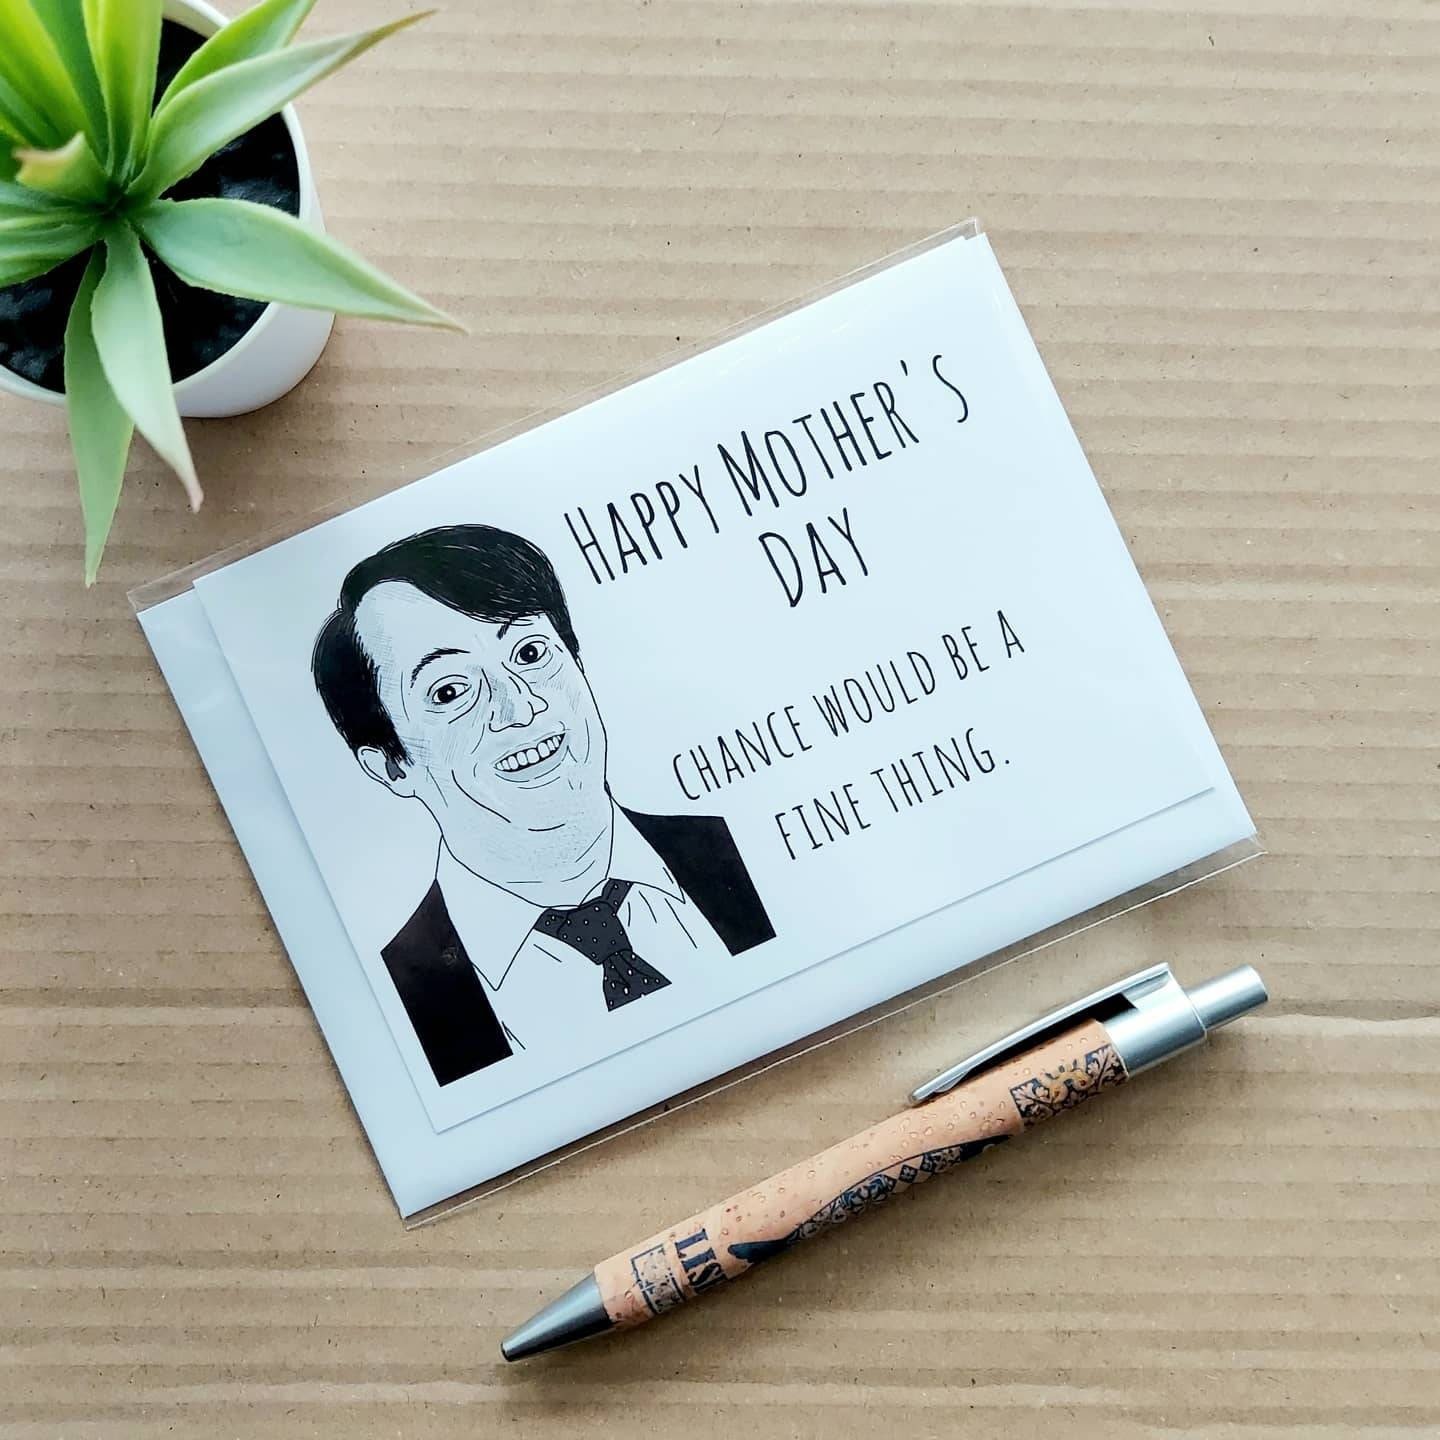 Funny Peep Show Mothers Day Card - Mark Corrigan Chance would be a fine thing quote